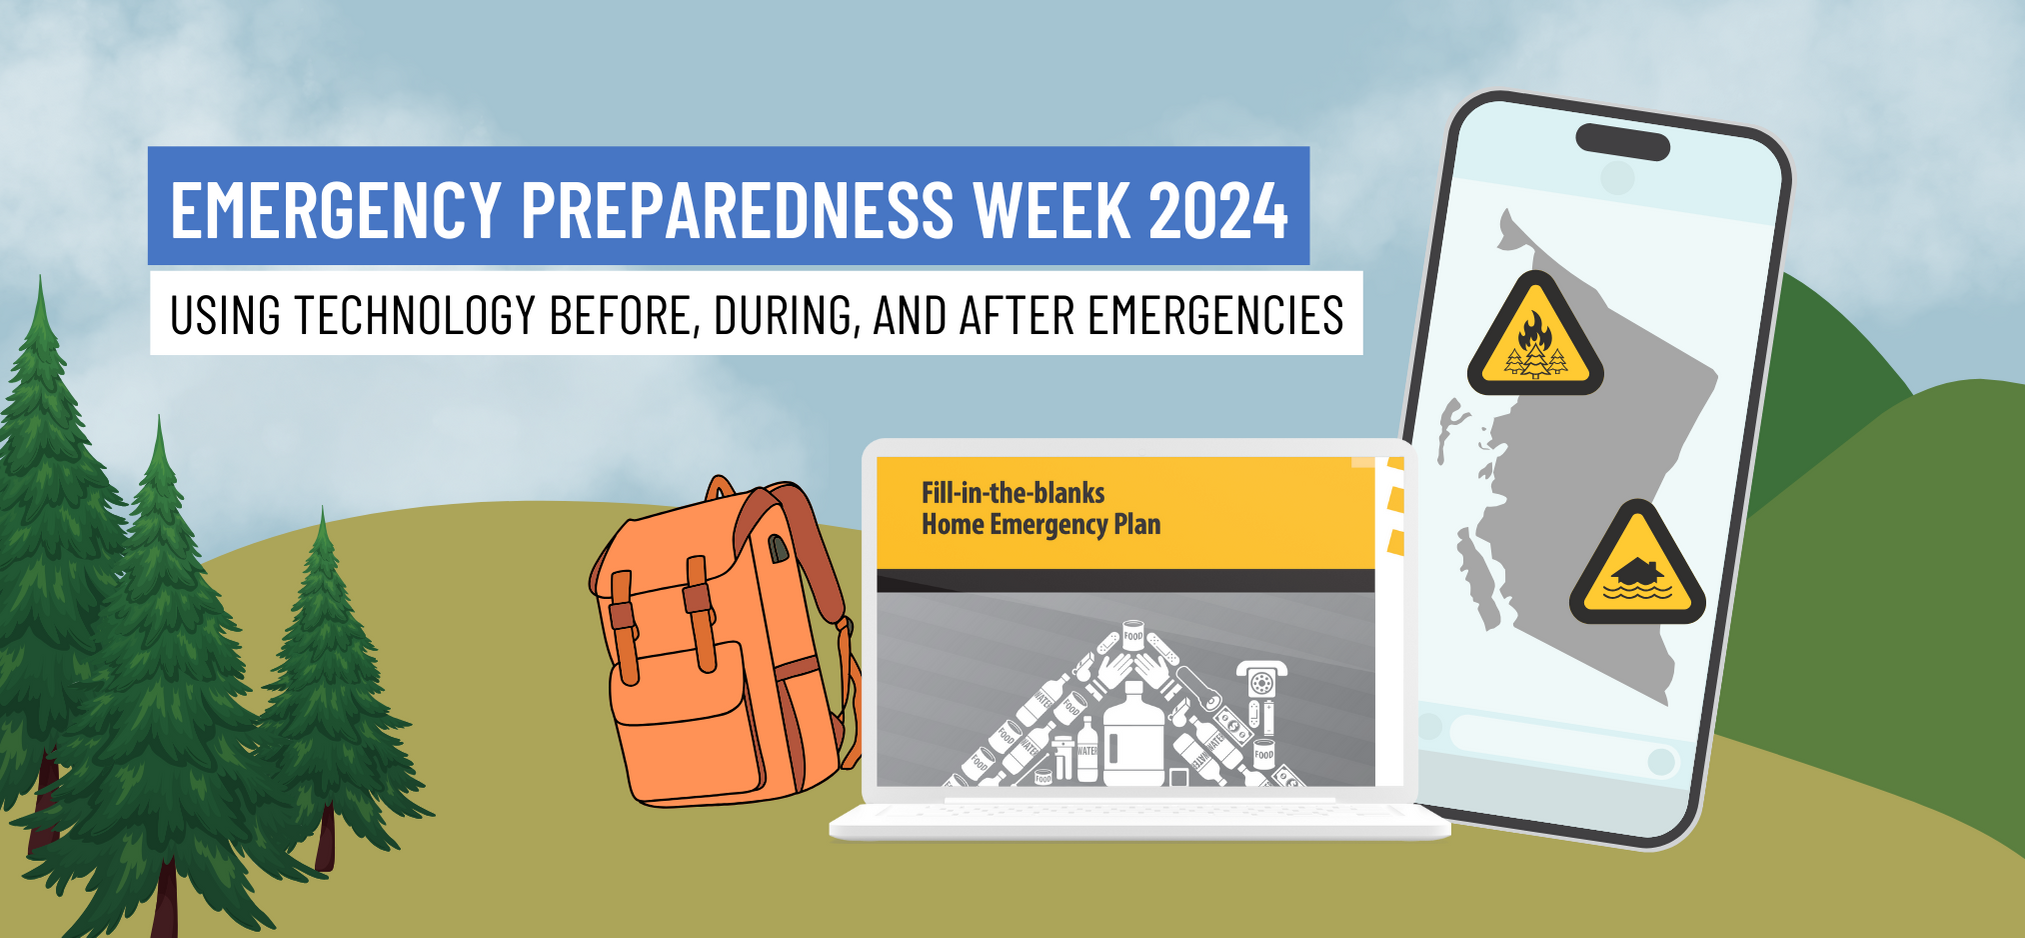 graphic that says "Emergency Preparedness Week 2024: Using Technology Before, During, and After emergencies"